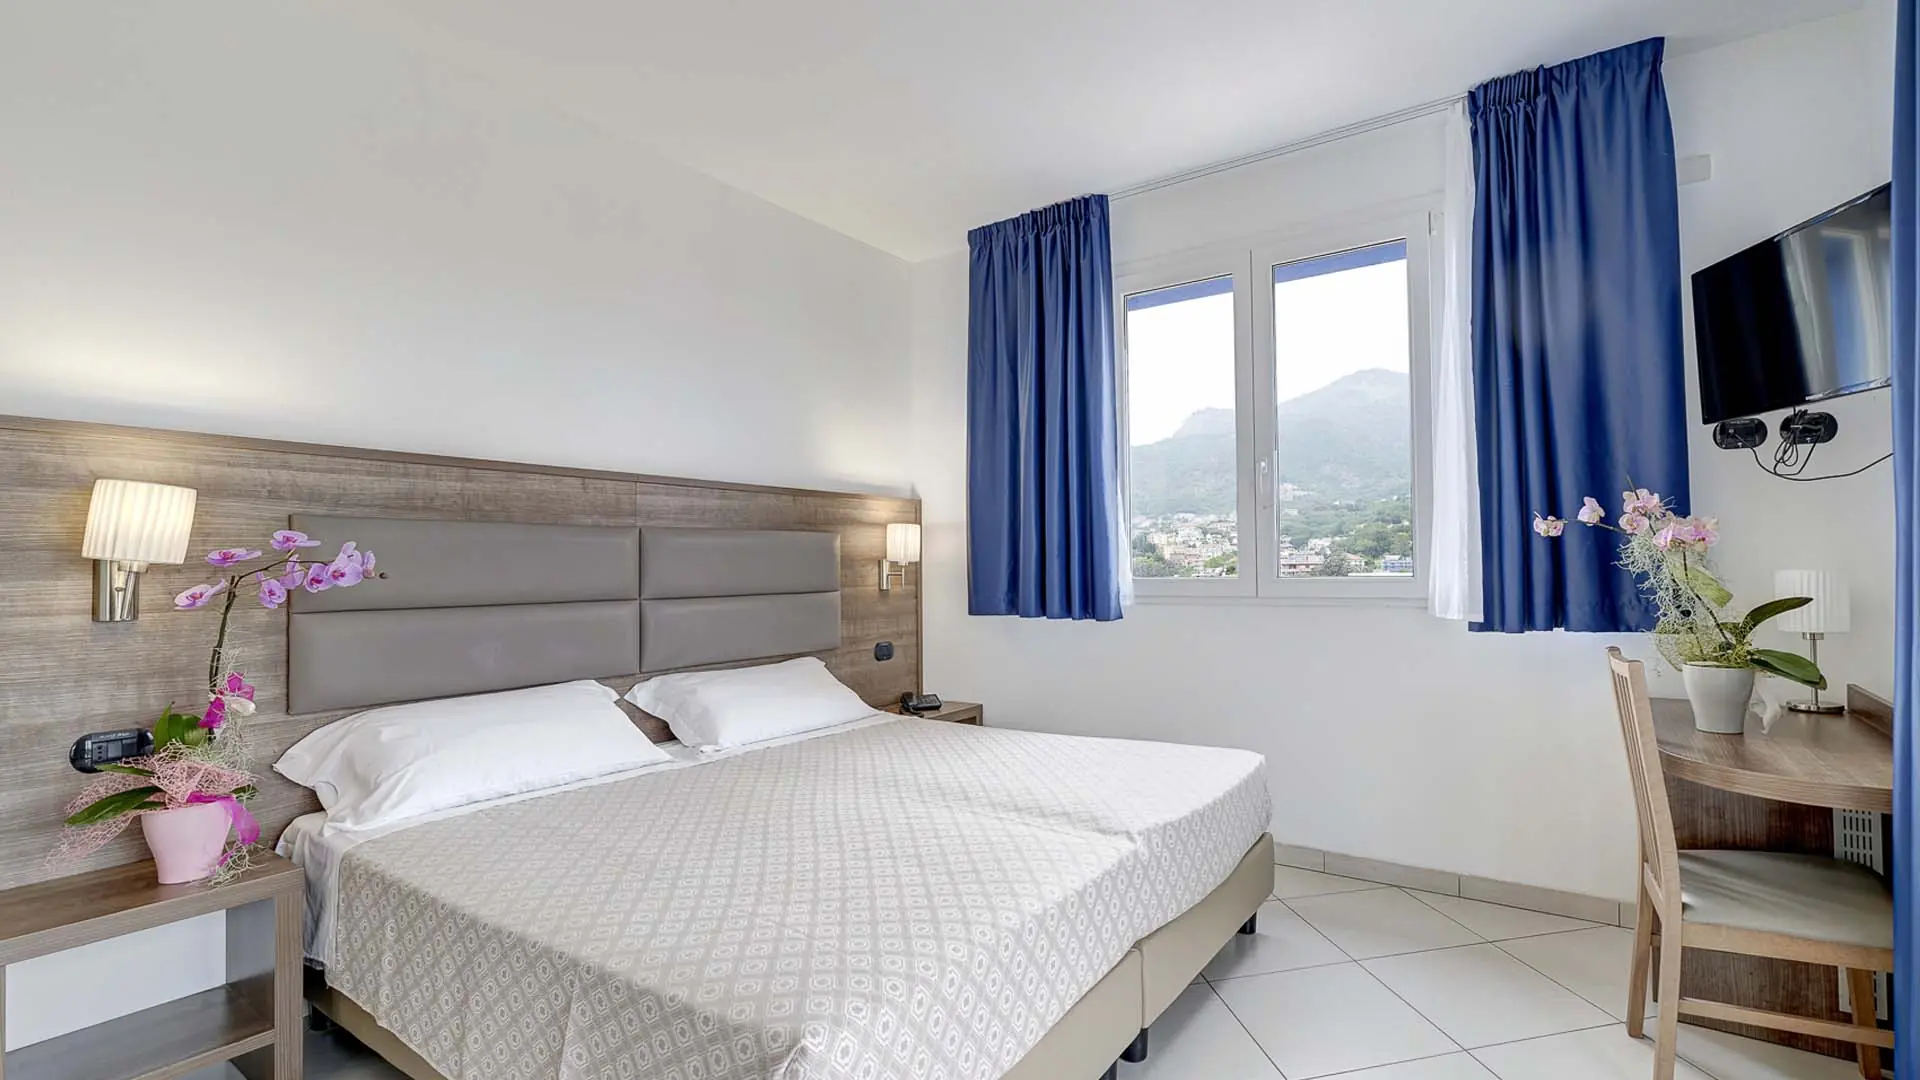 Double room with balcony or terrace overlooking the mountains